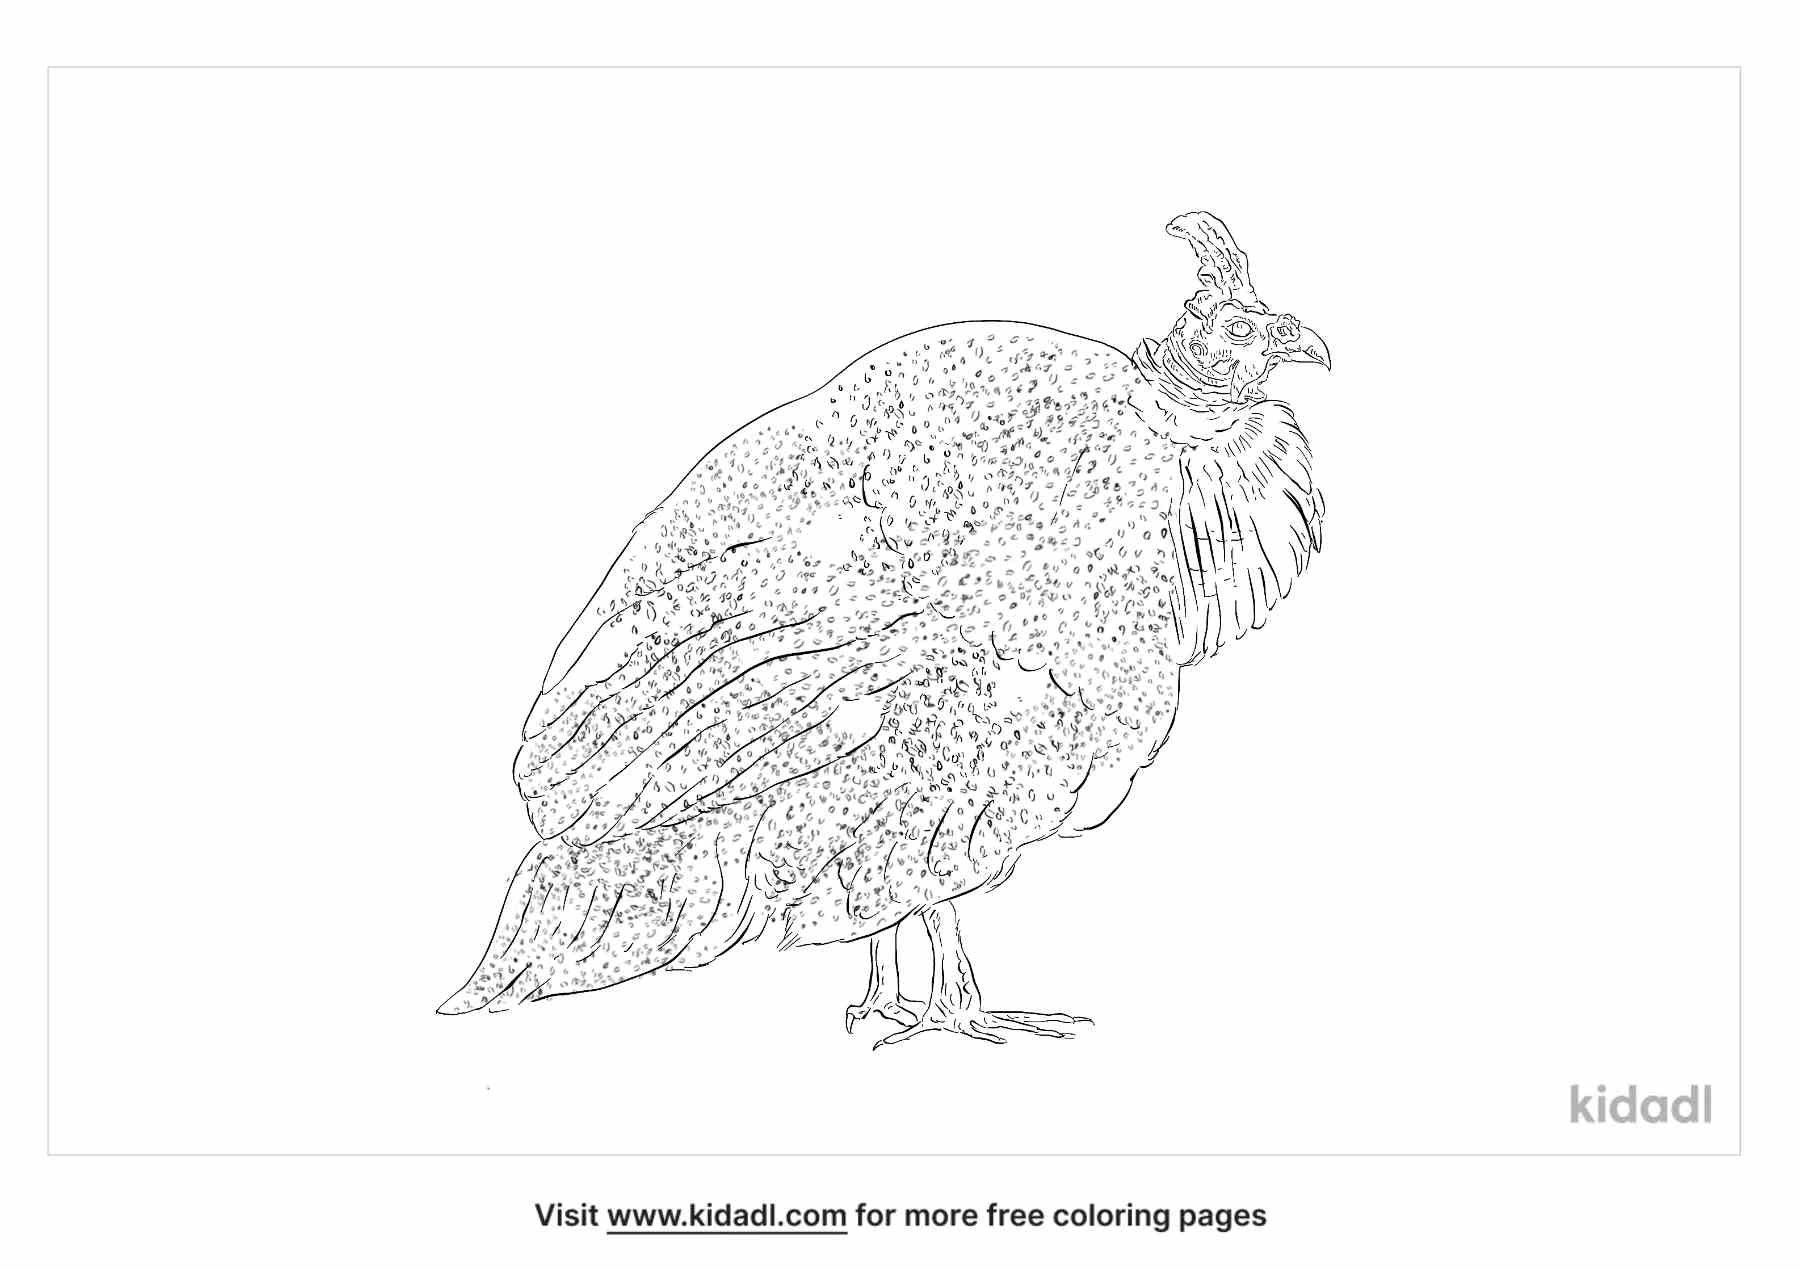 Helmeted Guineafowl coloring pages for kids.